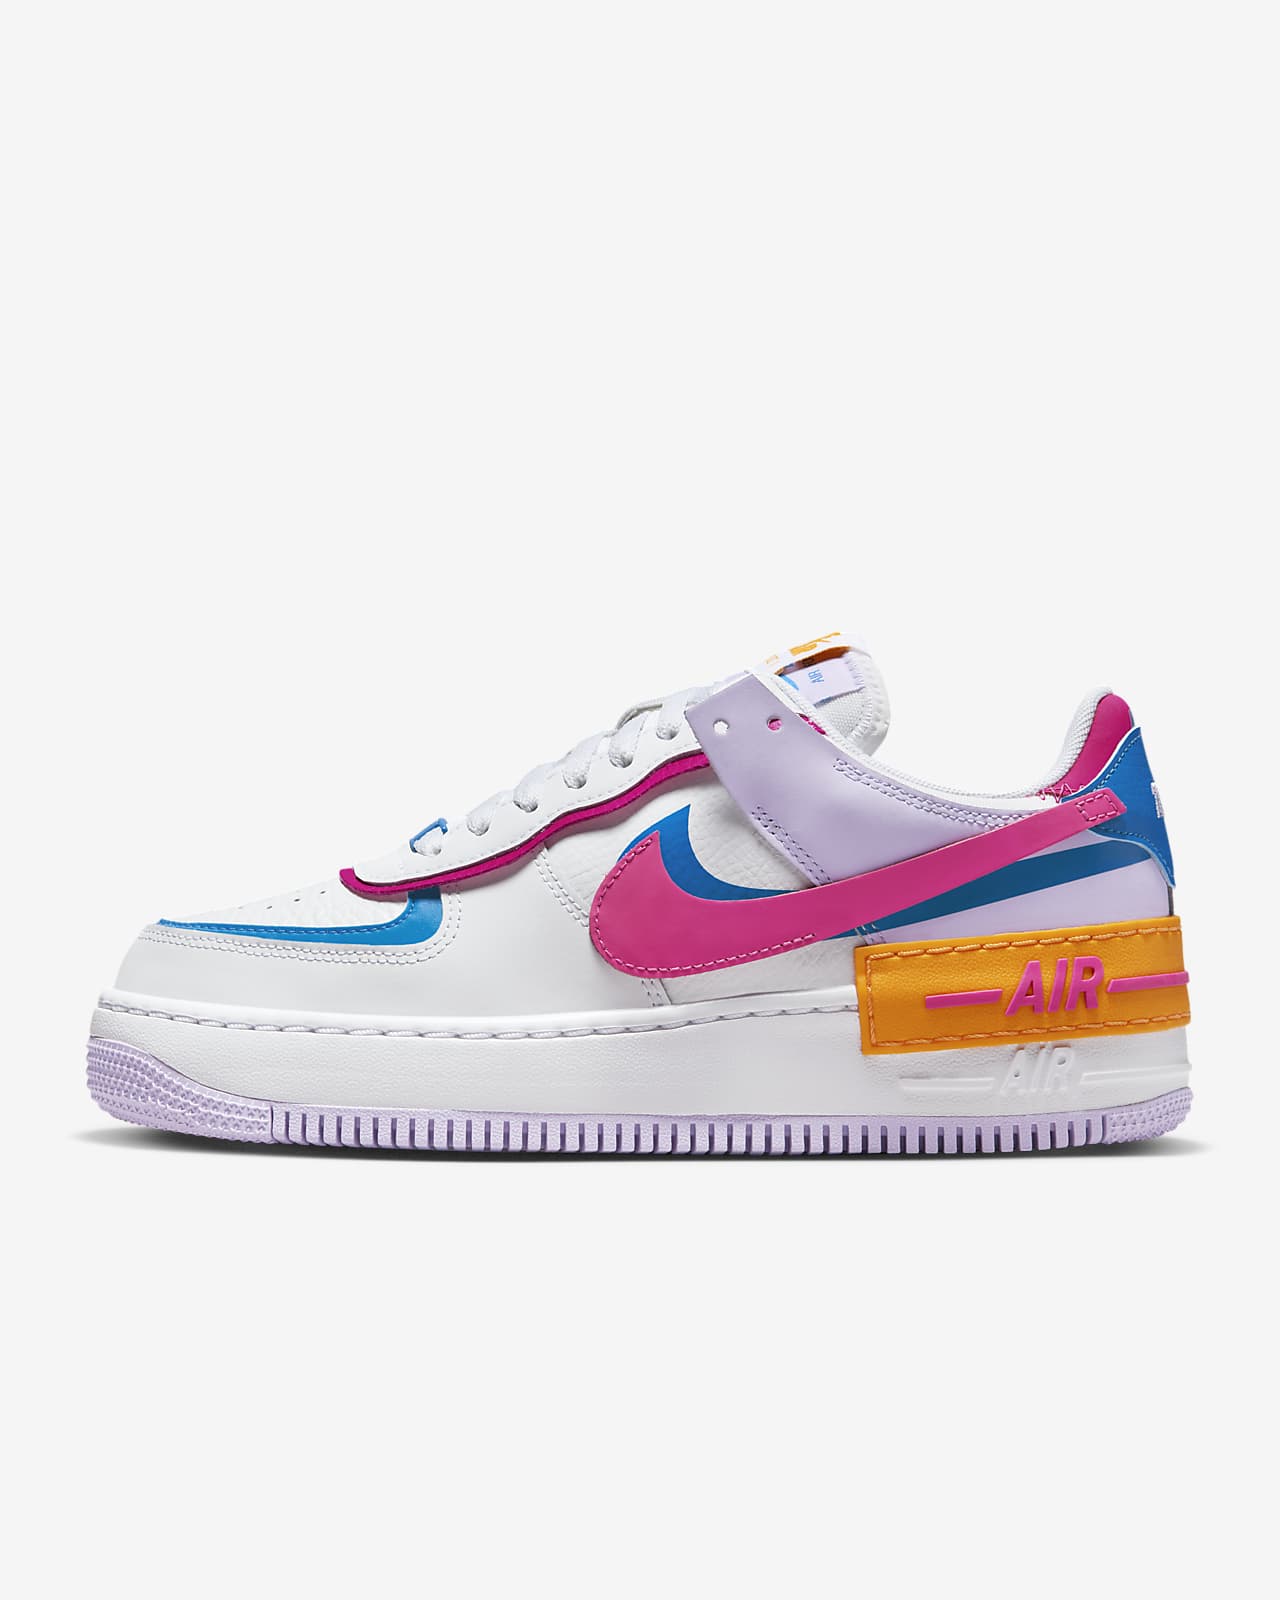 Nike Air Force 1 Sage Low Team Gold Leopard (Women's)